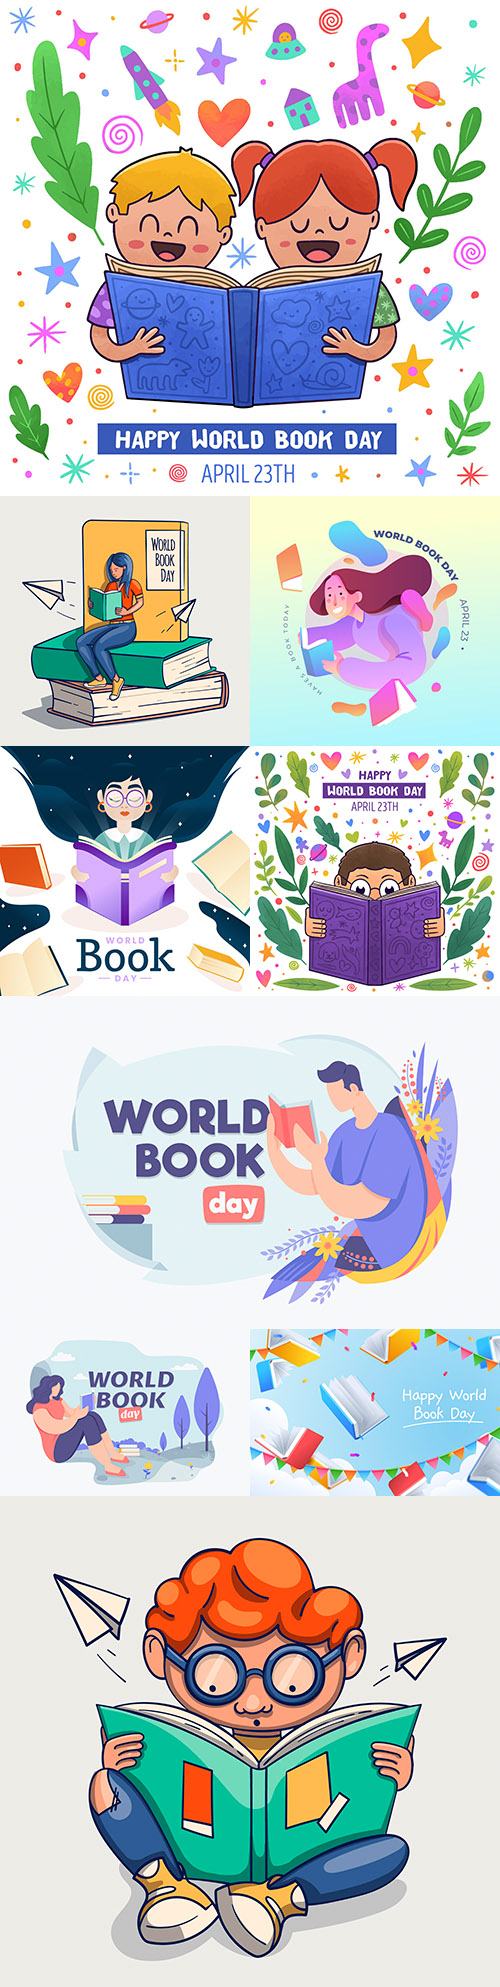 World Book day collection of illustrations flat design and watercolor
